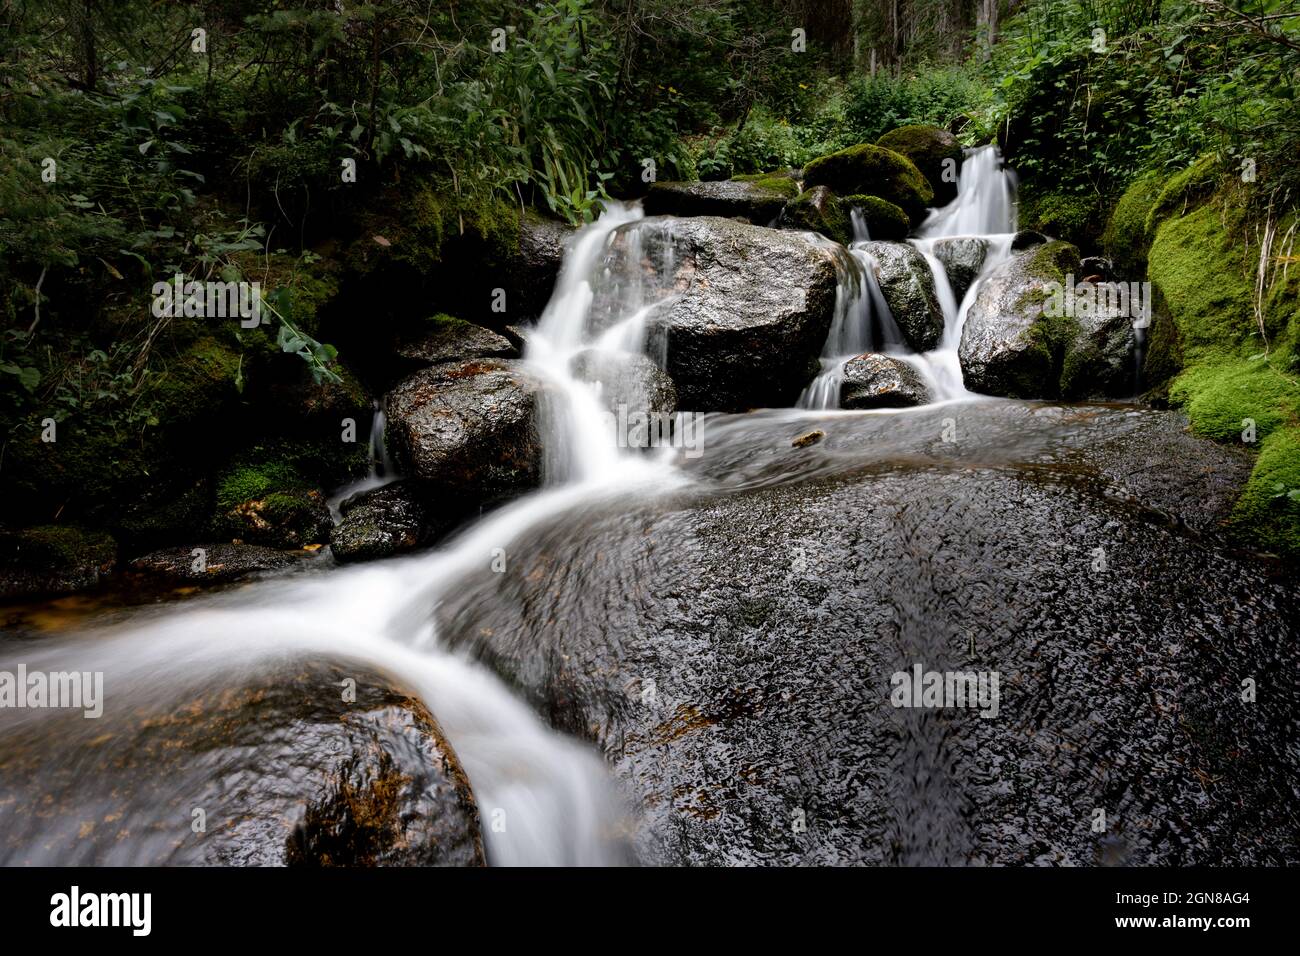 A stream cascades its way through rocks and moss. This water will become part of the Colorado River. Stock Photo